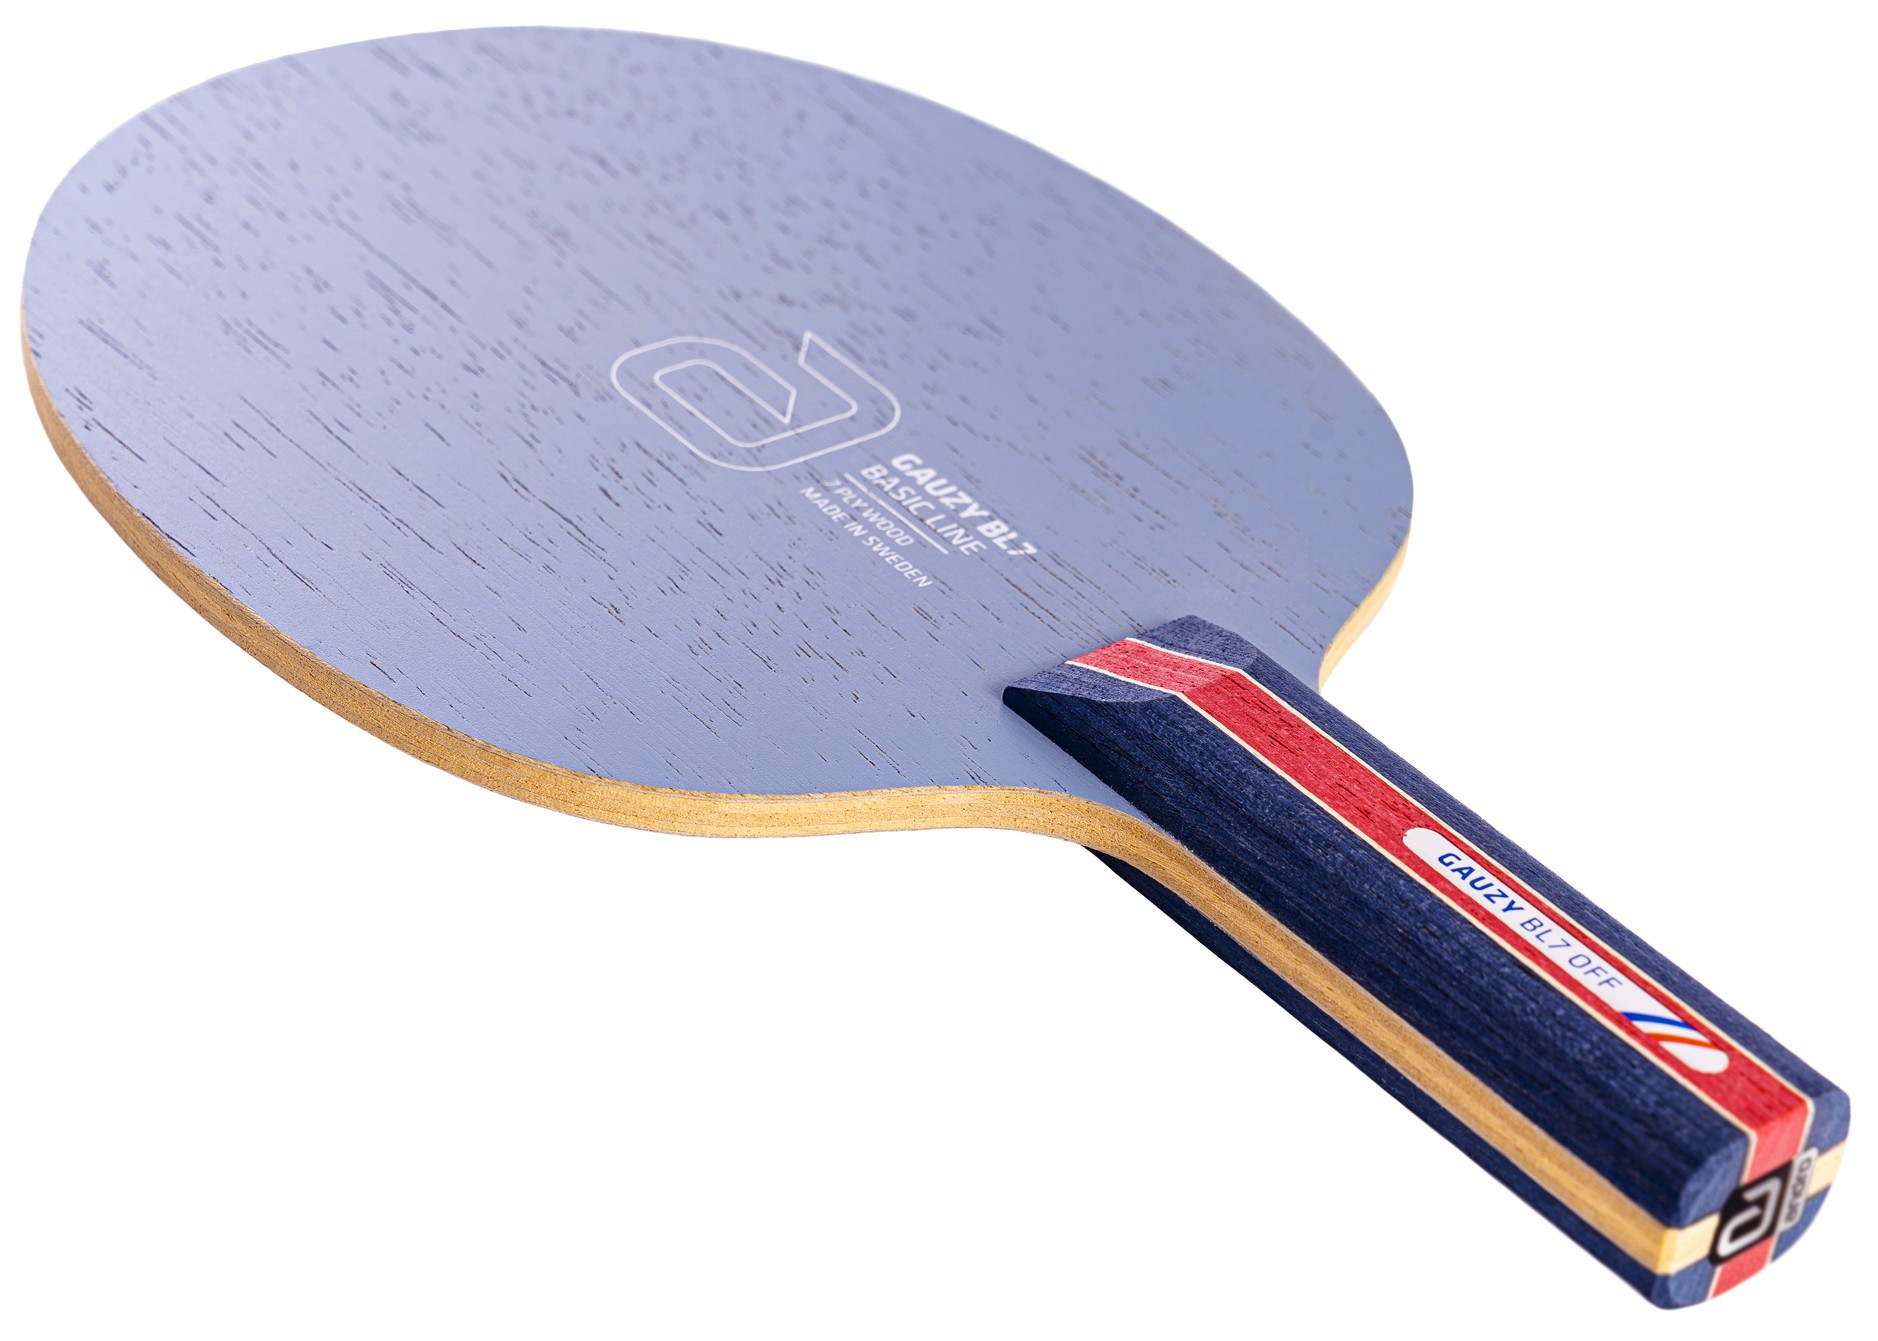 Details about   Andro Gauzy BL 7 OFF Table Tennis & Ping Pong Blade Authentic Pick Handle Type 